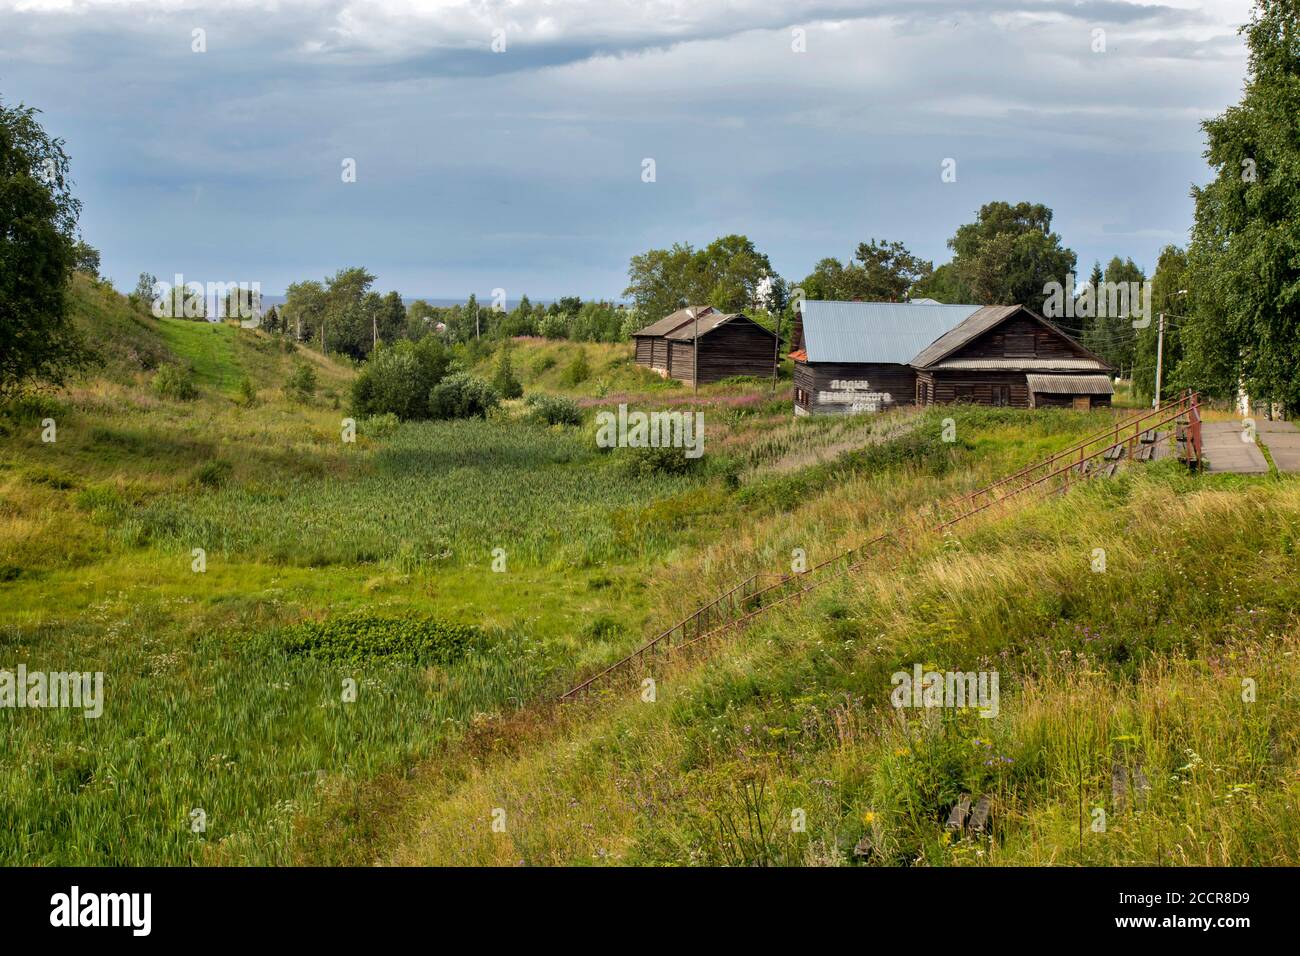 BELOZERSK, RUSSIA - 03 August 2020, landscape with the image of old russian north town Belozersk Stock Photo